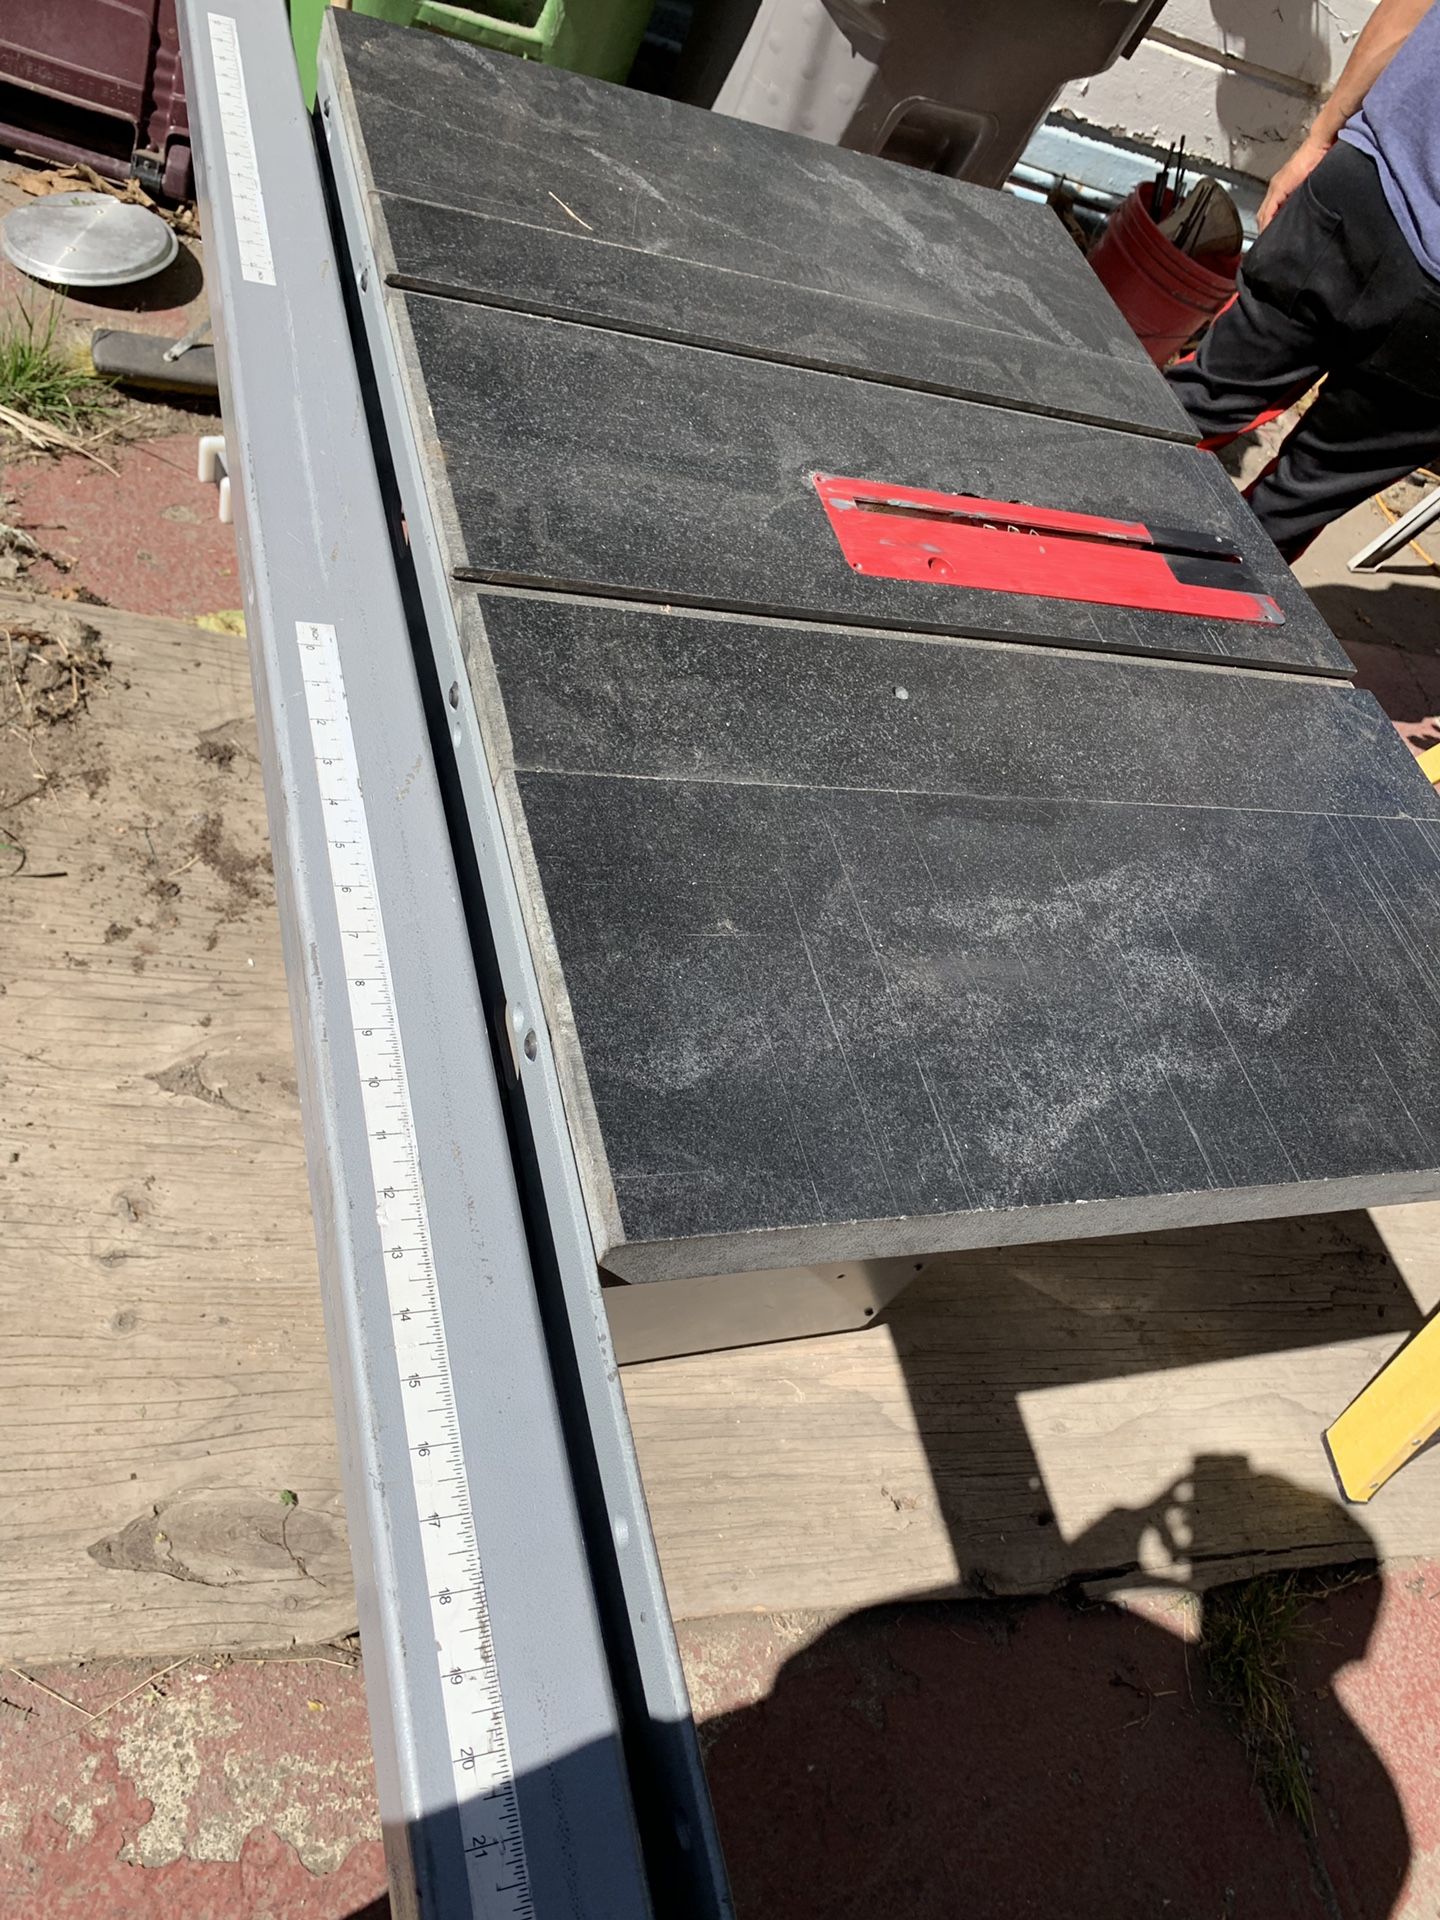 Table Saw Craftmans ( industrial saw ) OBO